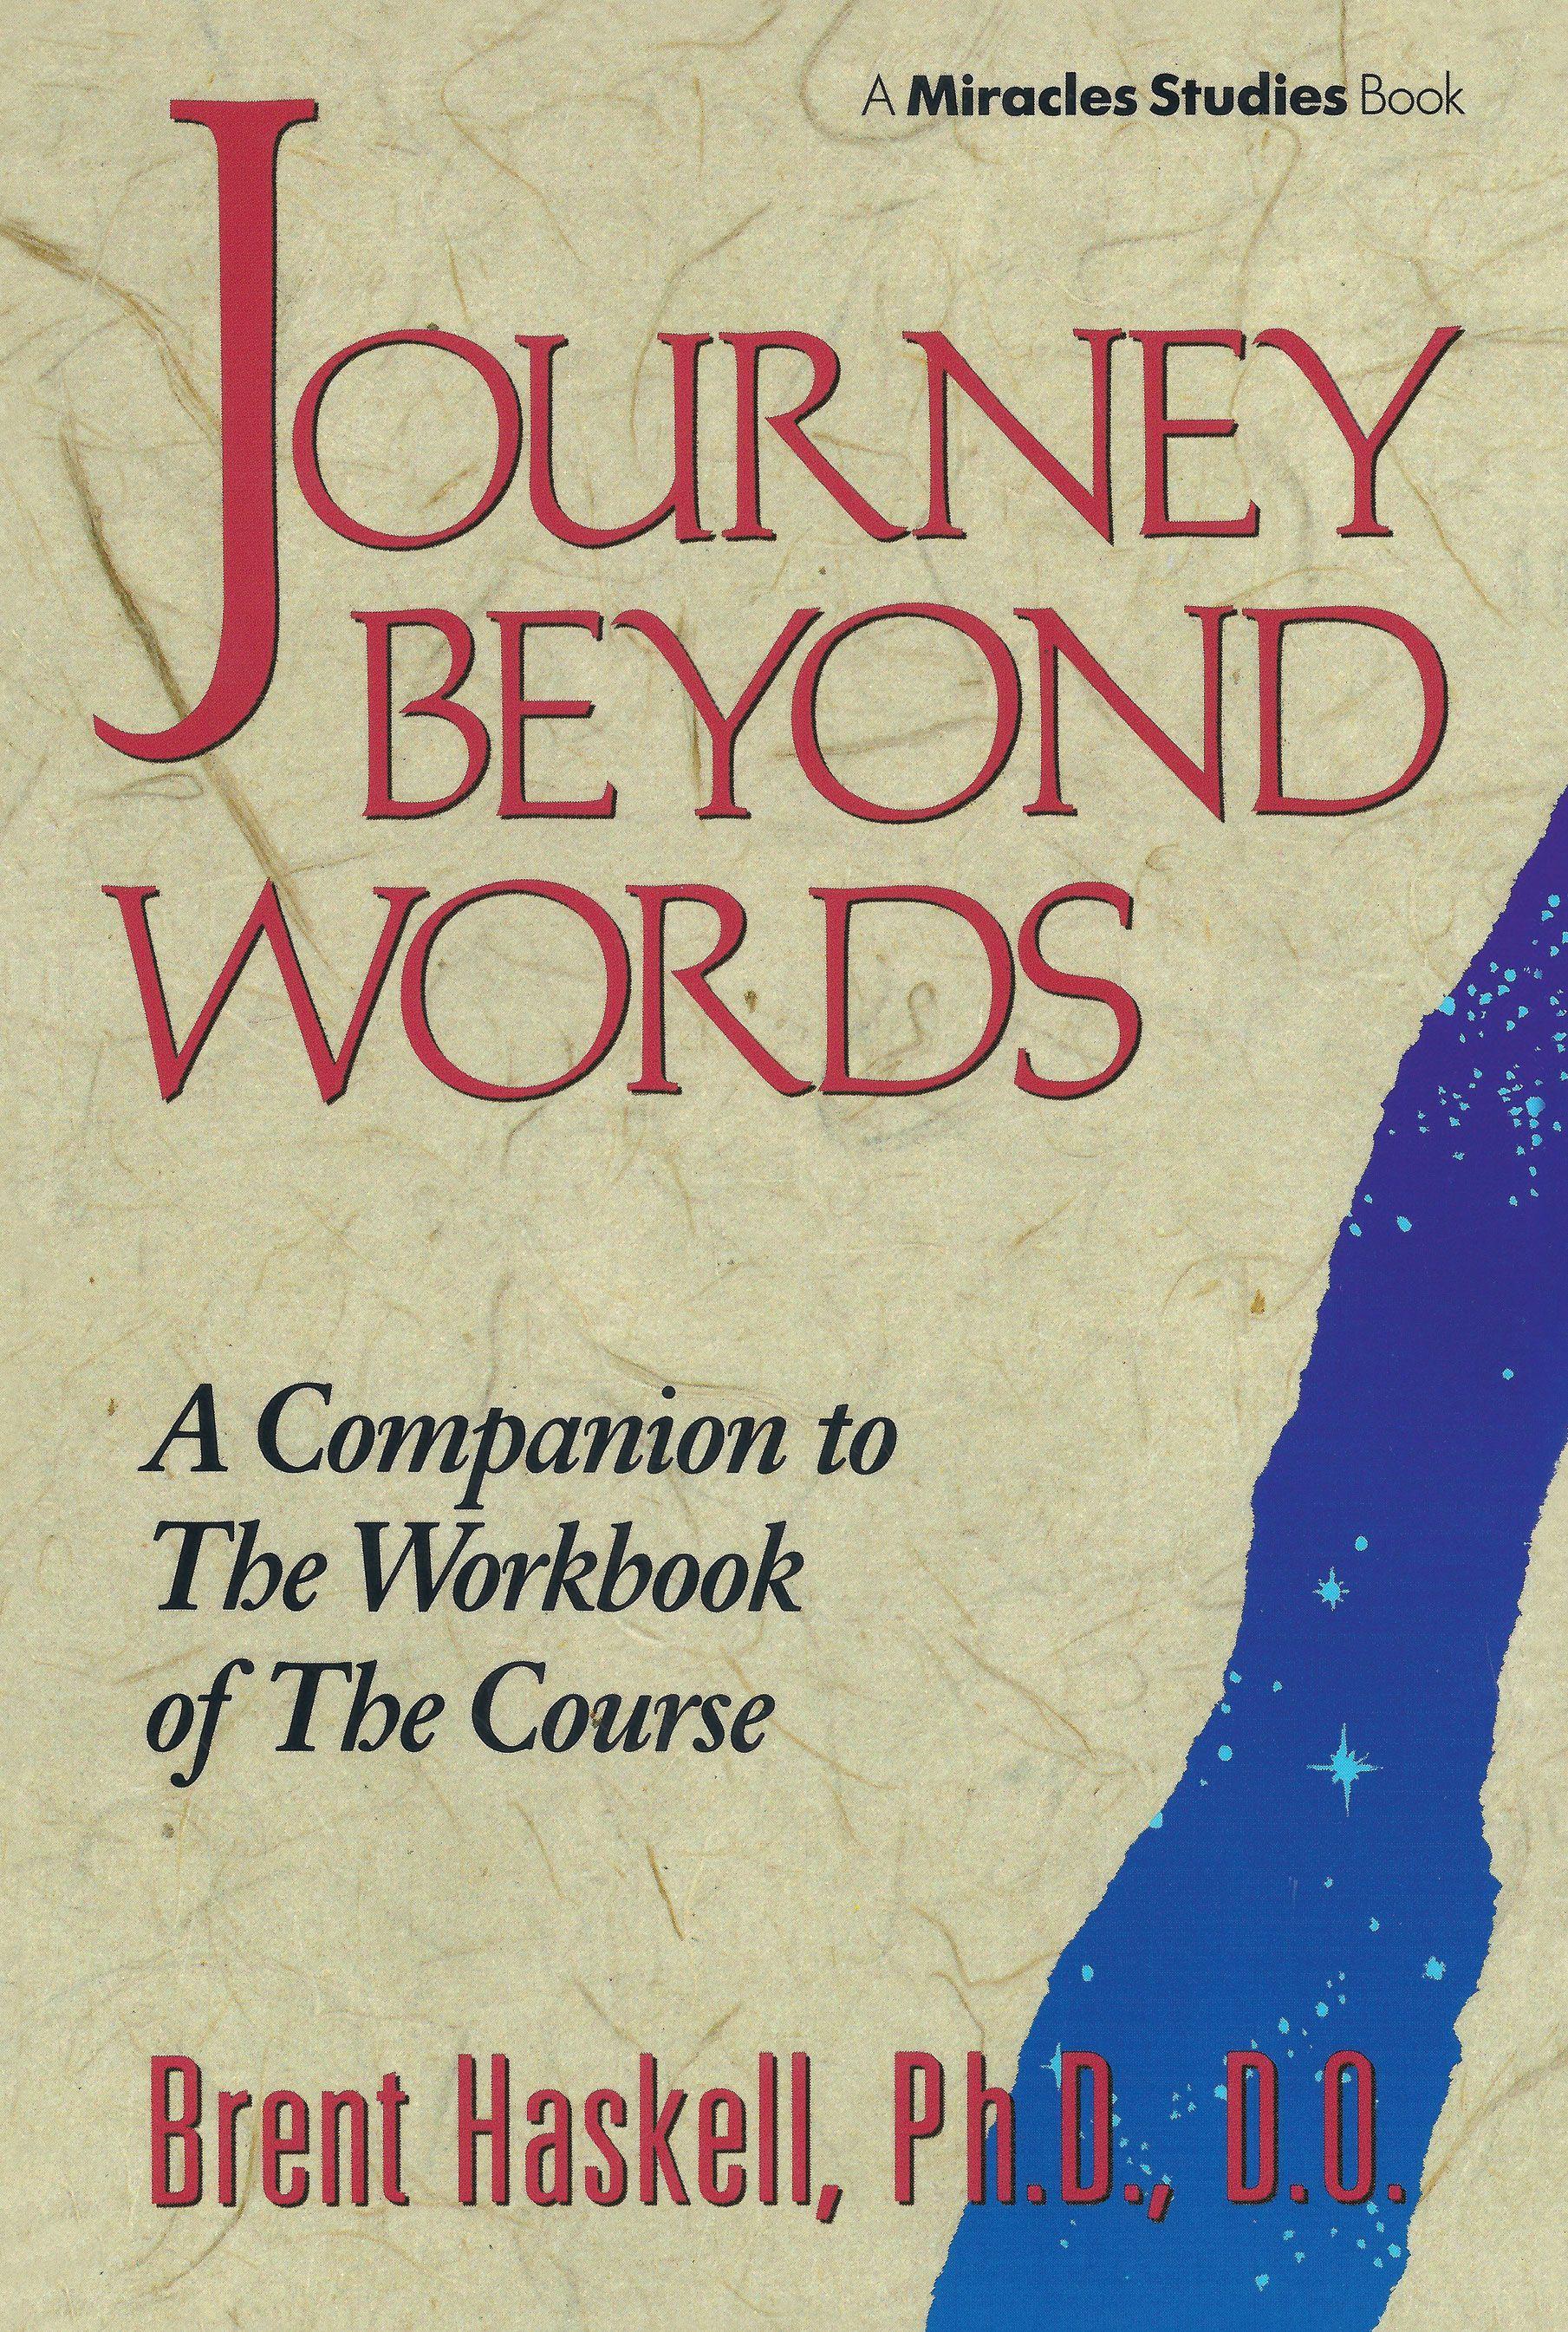 Journey Beyond Words | A Companion to the Workbook of the Course (Miracles Studies Book) | Brent Haskell | Taschenbuch | Englisch | 1994 | DEVORSS & CO | EAN 9780875166957 - Haskell, Brent